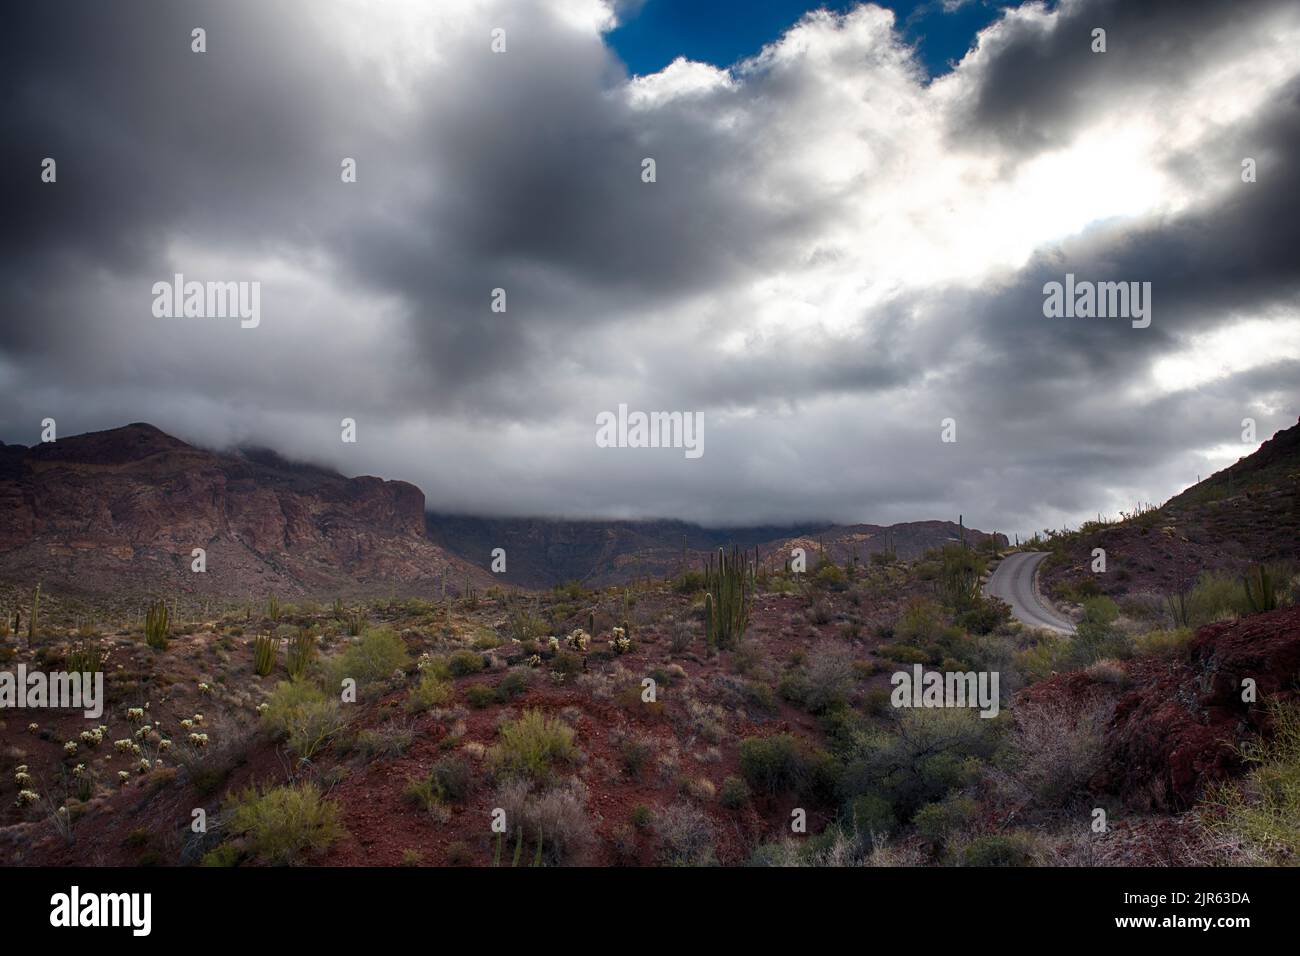 Vegetation and road in Organ Pipe Cactus National Monument, southern Arizona Stock Photo